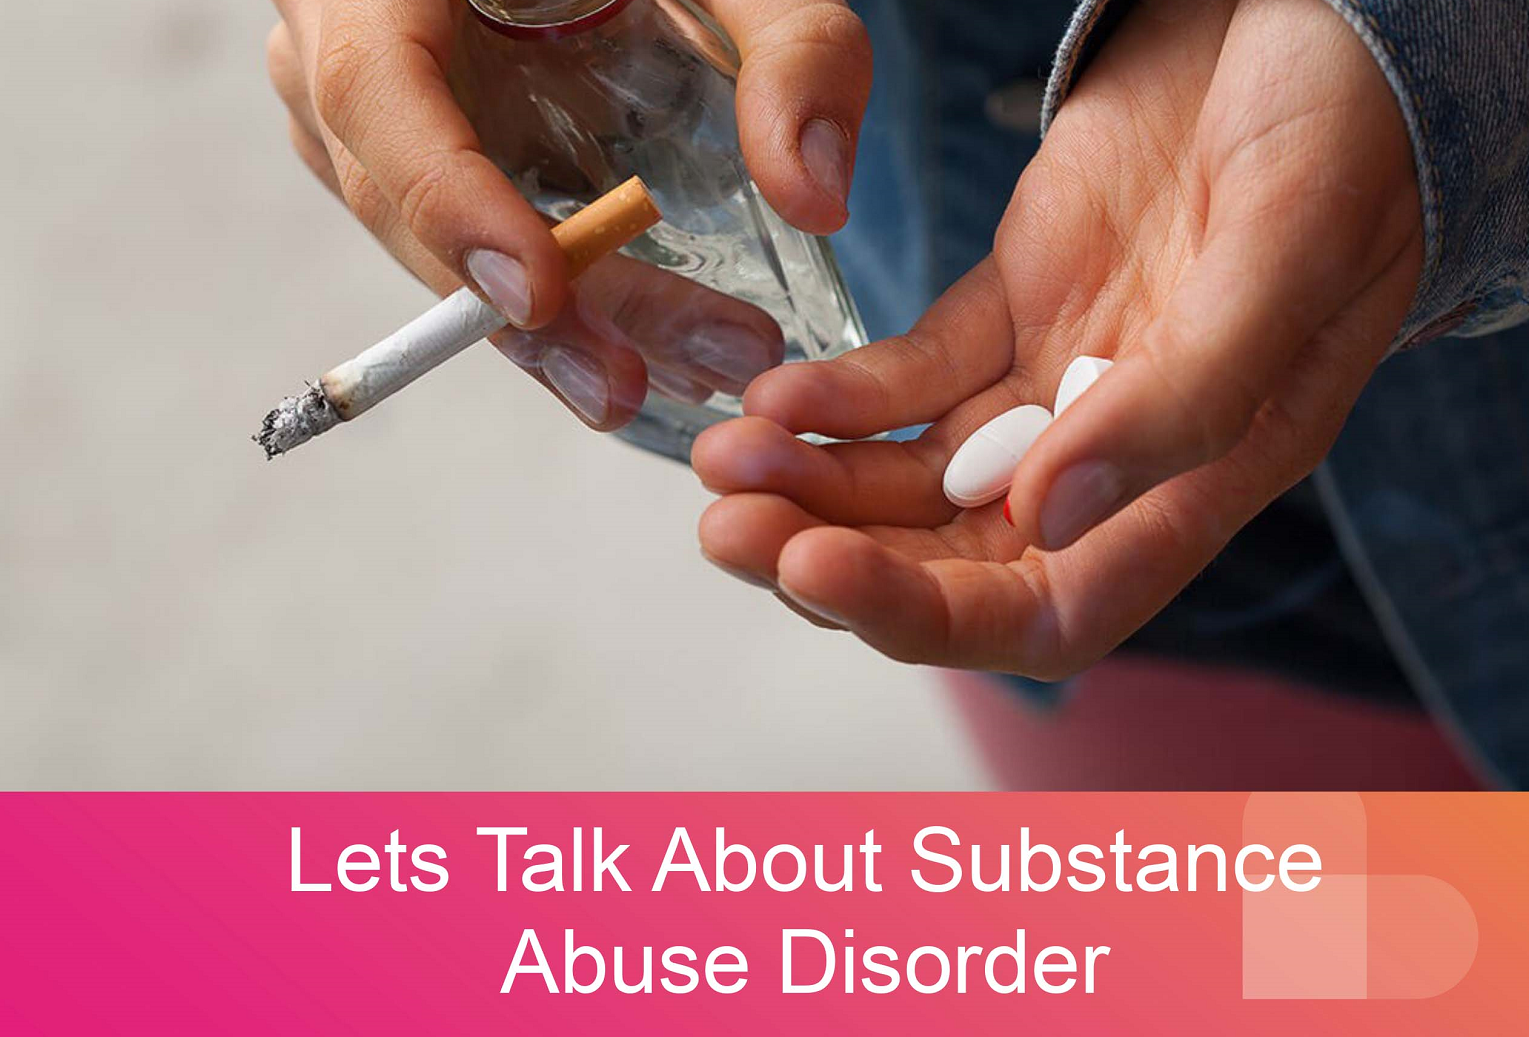 Hands holiding drugs and text: Lets talk about Substance Abuse Disorder